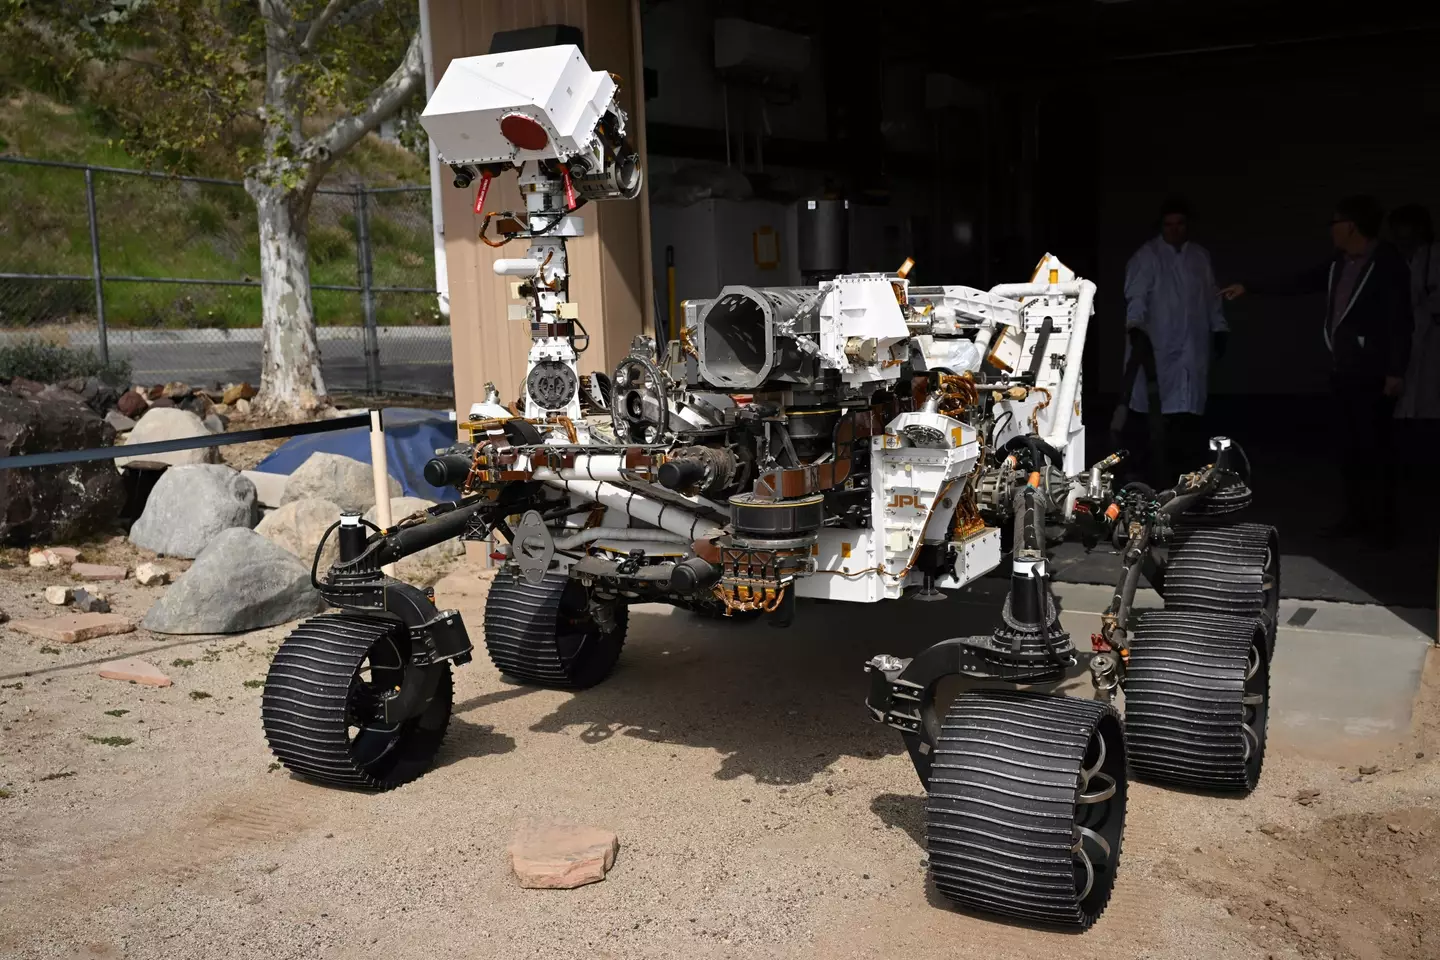 A full-scale model of NASA's Perseverance rover.